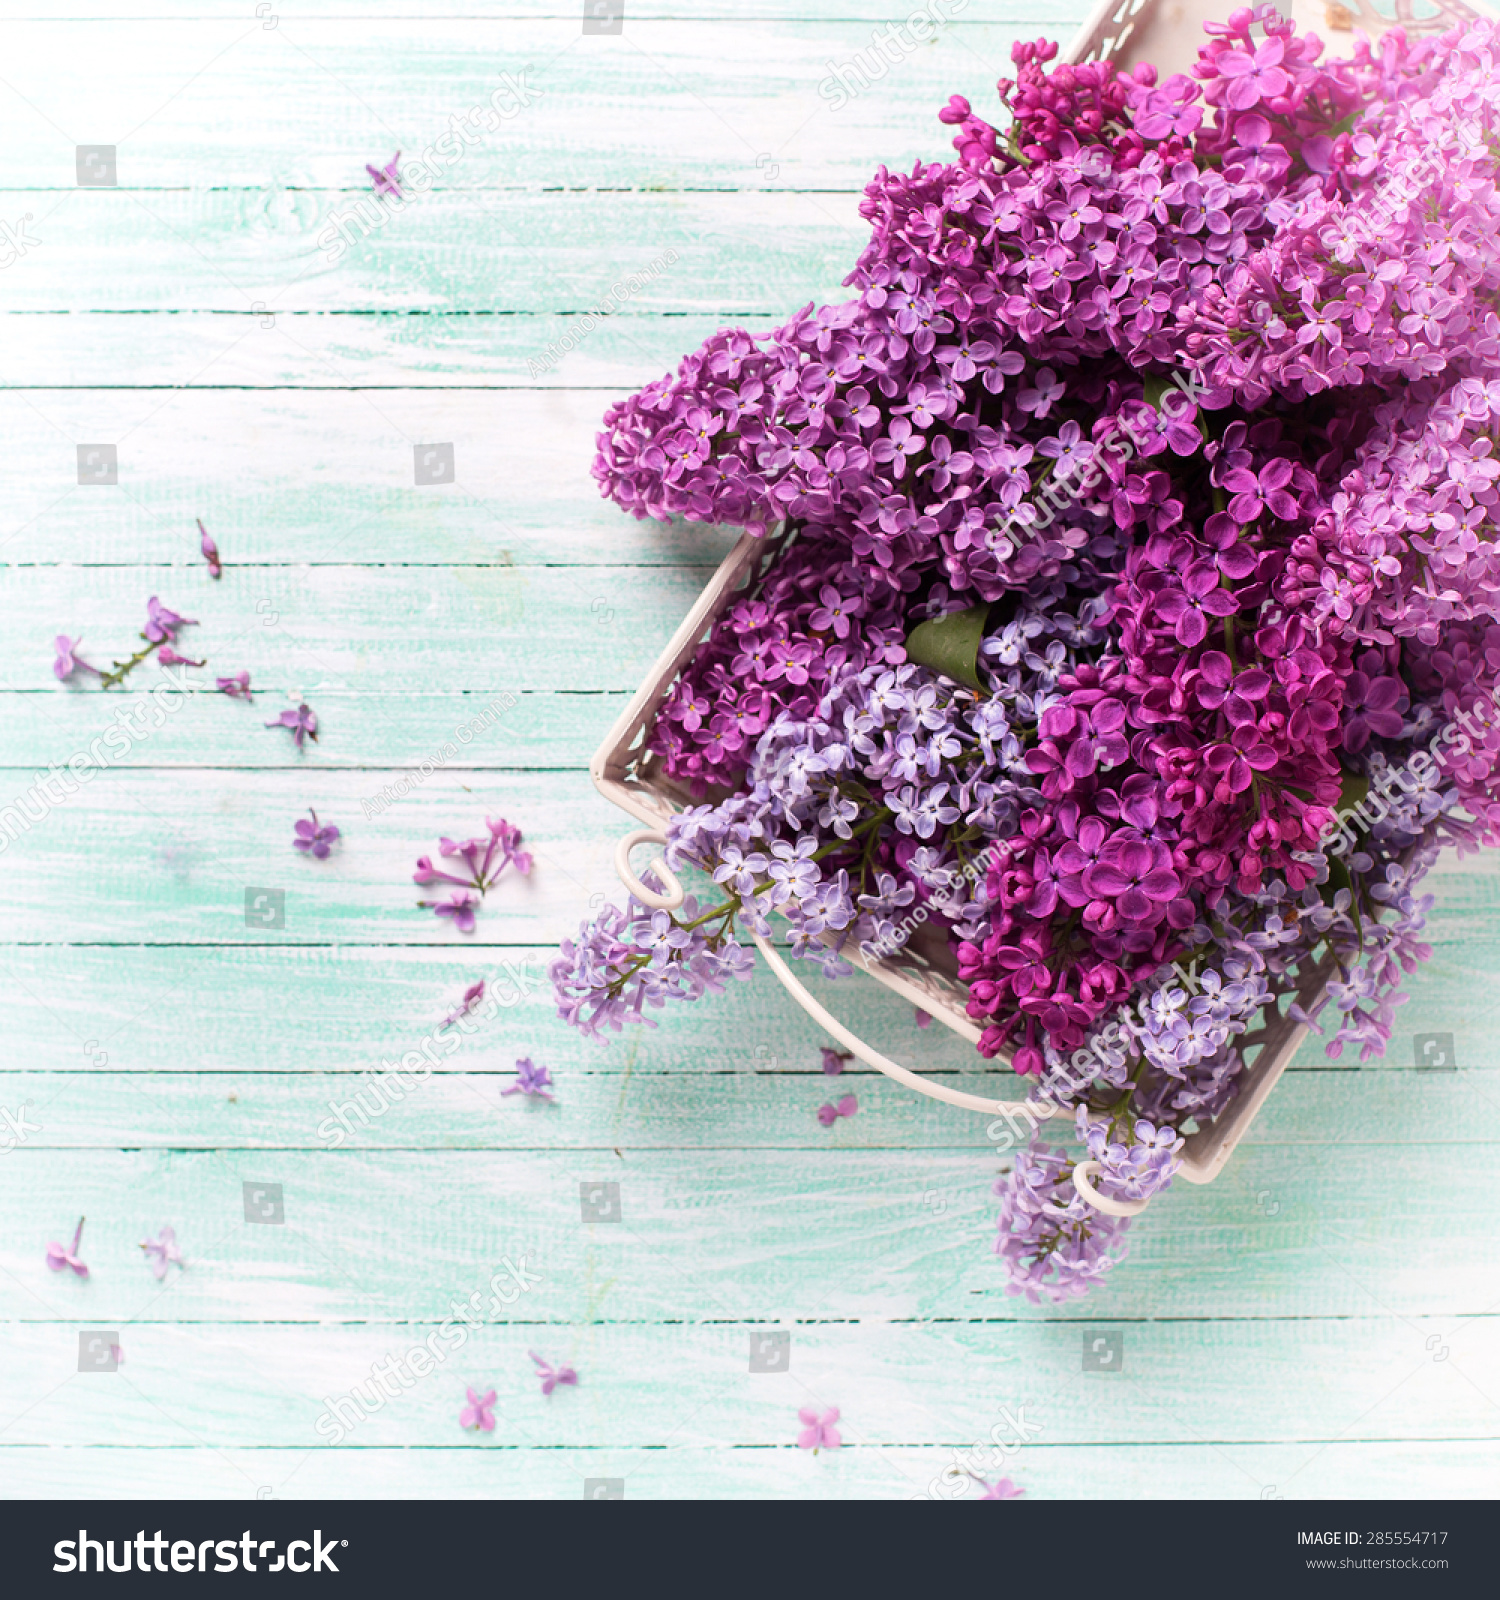 Fresh Lilac Flowers On Tray On Stock Photo 285554717 - Shutterstock